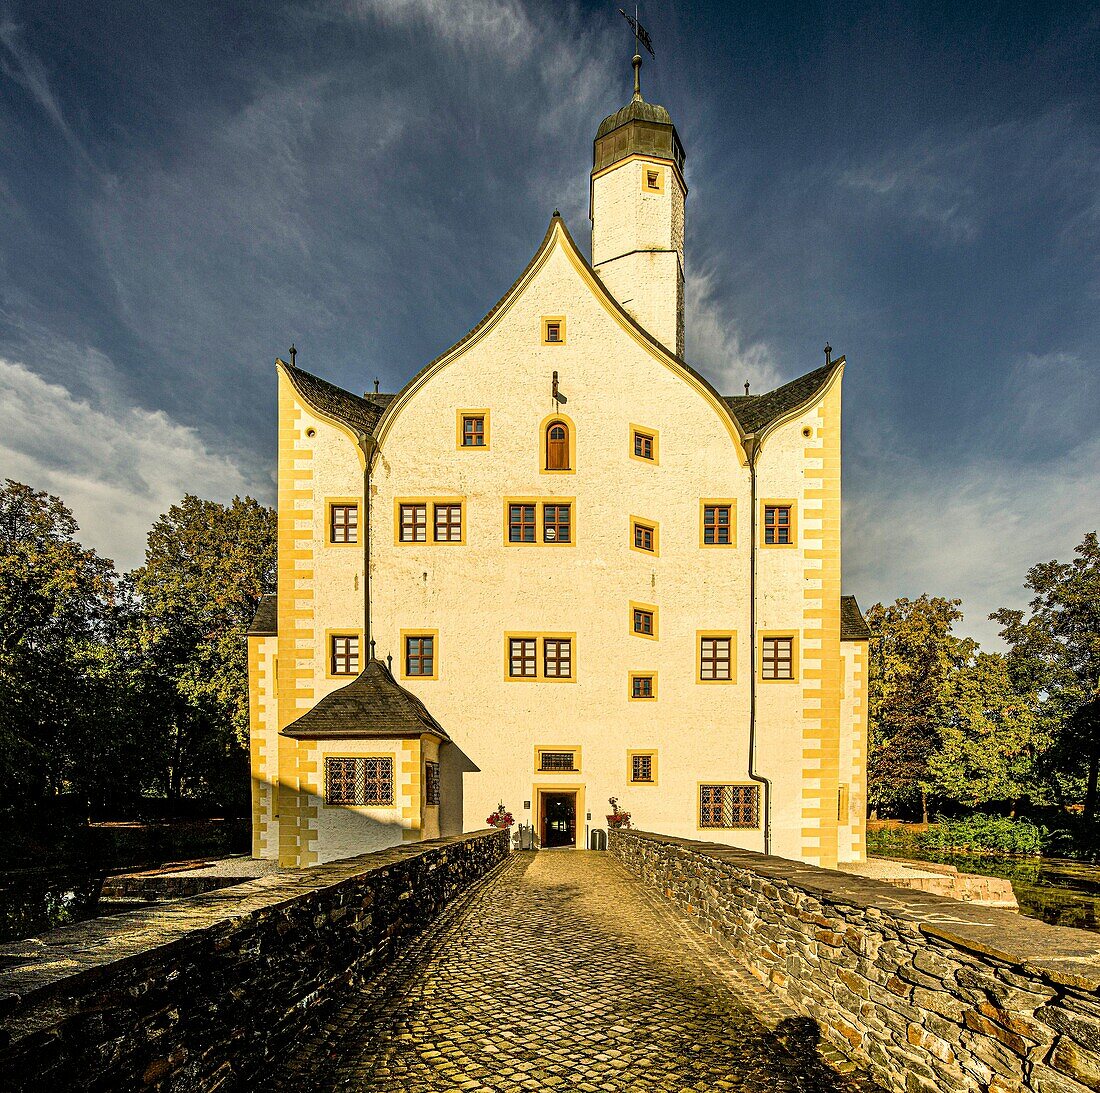 Klaffenbach moated castle from the Renaissance period in the morning light, Chemnitz, Saxony, Germany